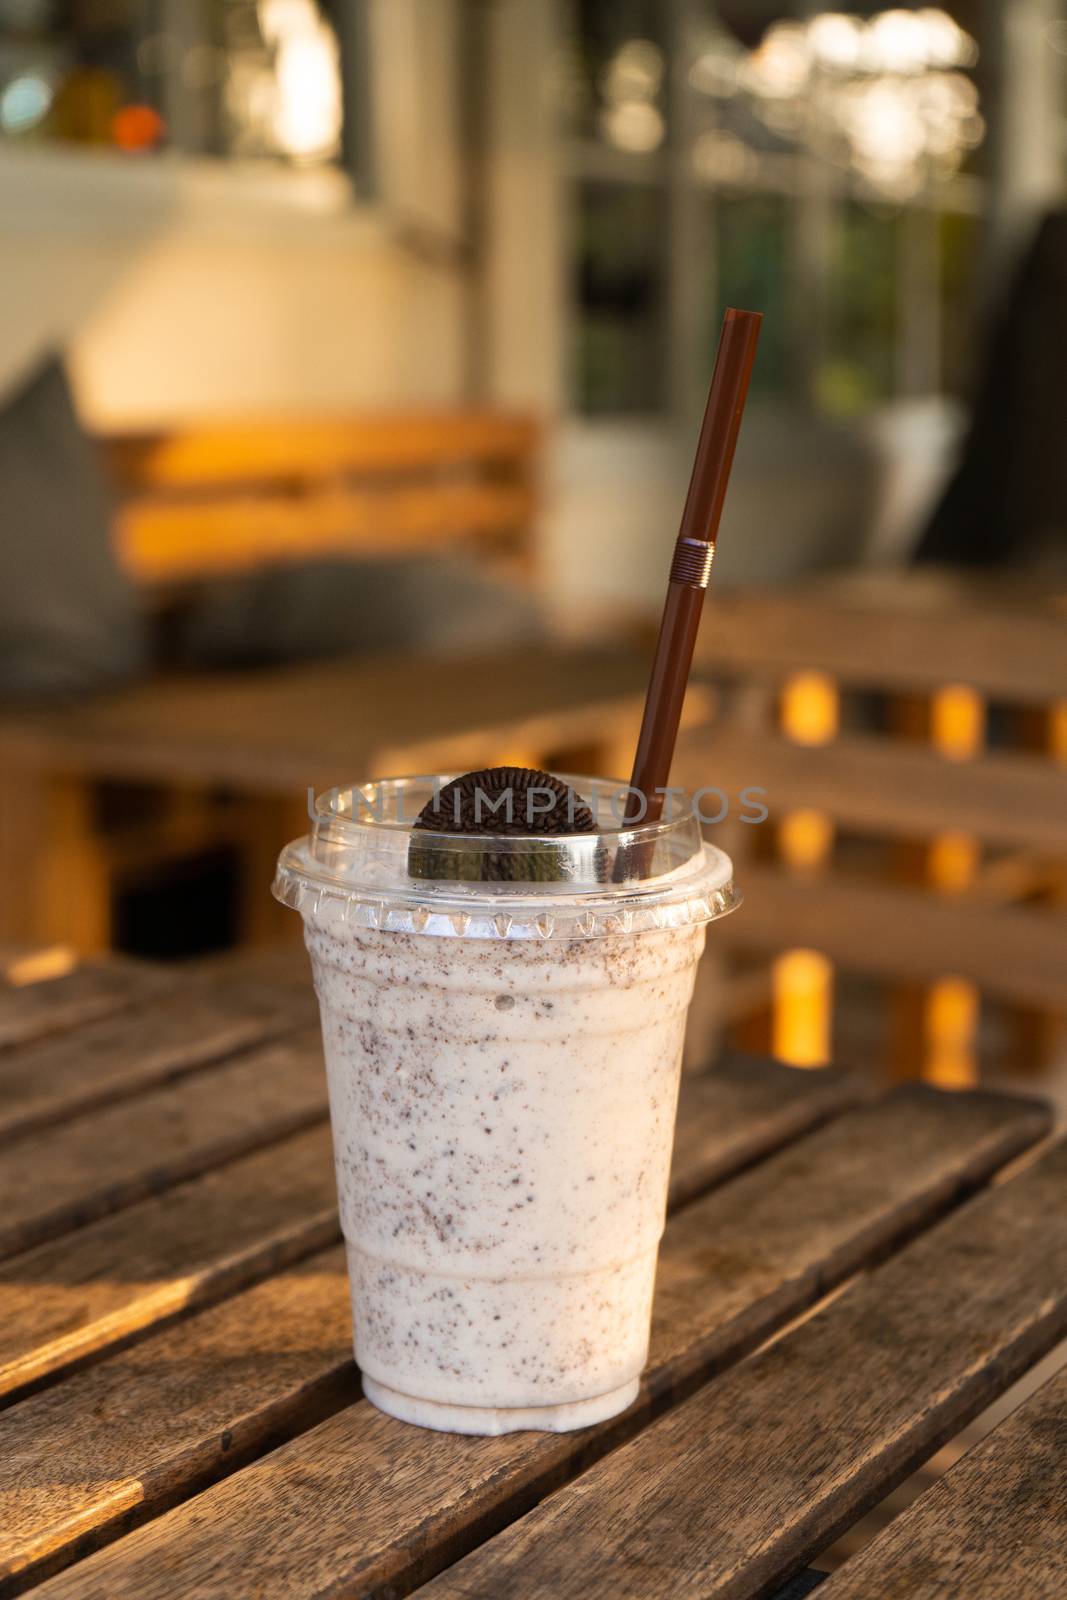 Milkshake with ice cream and oreo cookies. Cool and refreshing on a hot day by Try_my_best